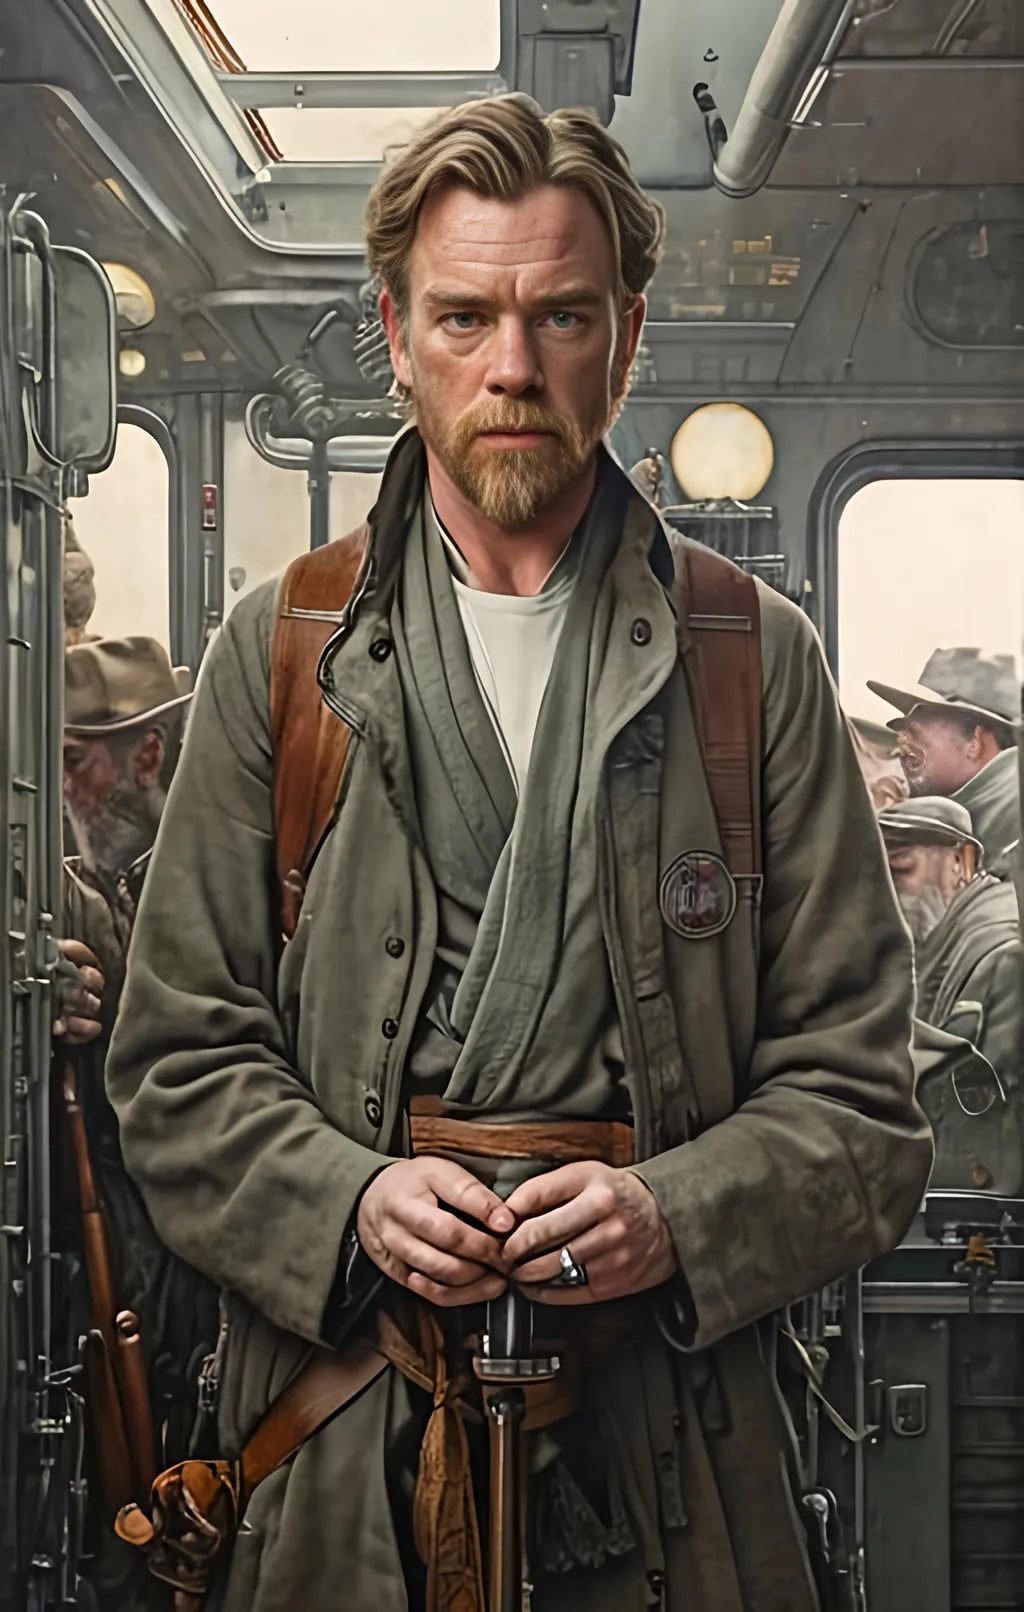 Prompt: create a highly detailed colored pencil drawing on grey paper, in the style of Norman Rockwell, Tsutomu Nihei and Steve Hanks. Every detail is meticulously captured, in HDR (High Dynamic Range), UHD (Ultra High Definition), and 1080p.   Ewan McGregor takes on the iconic role of Obi-Wan Kenobi  in the drama tv series "Obi-Wan Kenobi." use costumes from the movie.

use all best practices in art and design to produce what would be recognized as a master work art piece. use accurate perspective and foreshortening. use atmospheric perspective. create expressive faces and use dramatic lighting. fur coat and fur hat.


Ewan McGregor takes on the iconic role of Obi-Wan Kenobi in the TV series, portraying a Jedi Master who survived Order 66 and now lives in exile on the desert planet Tatooine under the alias "Ben." McGregor is enthusiastic about embodying a version of the character closer to Alec Guinness's portrayal in the original Star Wars trilogy. In the series, Kenobi is depicted as broken and faithless, grappling with guilt over leaving his apprentice Anakin for dead on Mustafar. His wardrobe reflects a worn and weathered appearance, mirroring the character's state of mind. Executive producer Michelle Rejwan describes Kenobi as going through a traumatic moment, and head writer Joby Harold aims to bridge the emotional version of Kenobi from the prequels to Alec Guinness's wise "zen master" in A New Hope.
